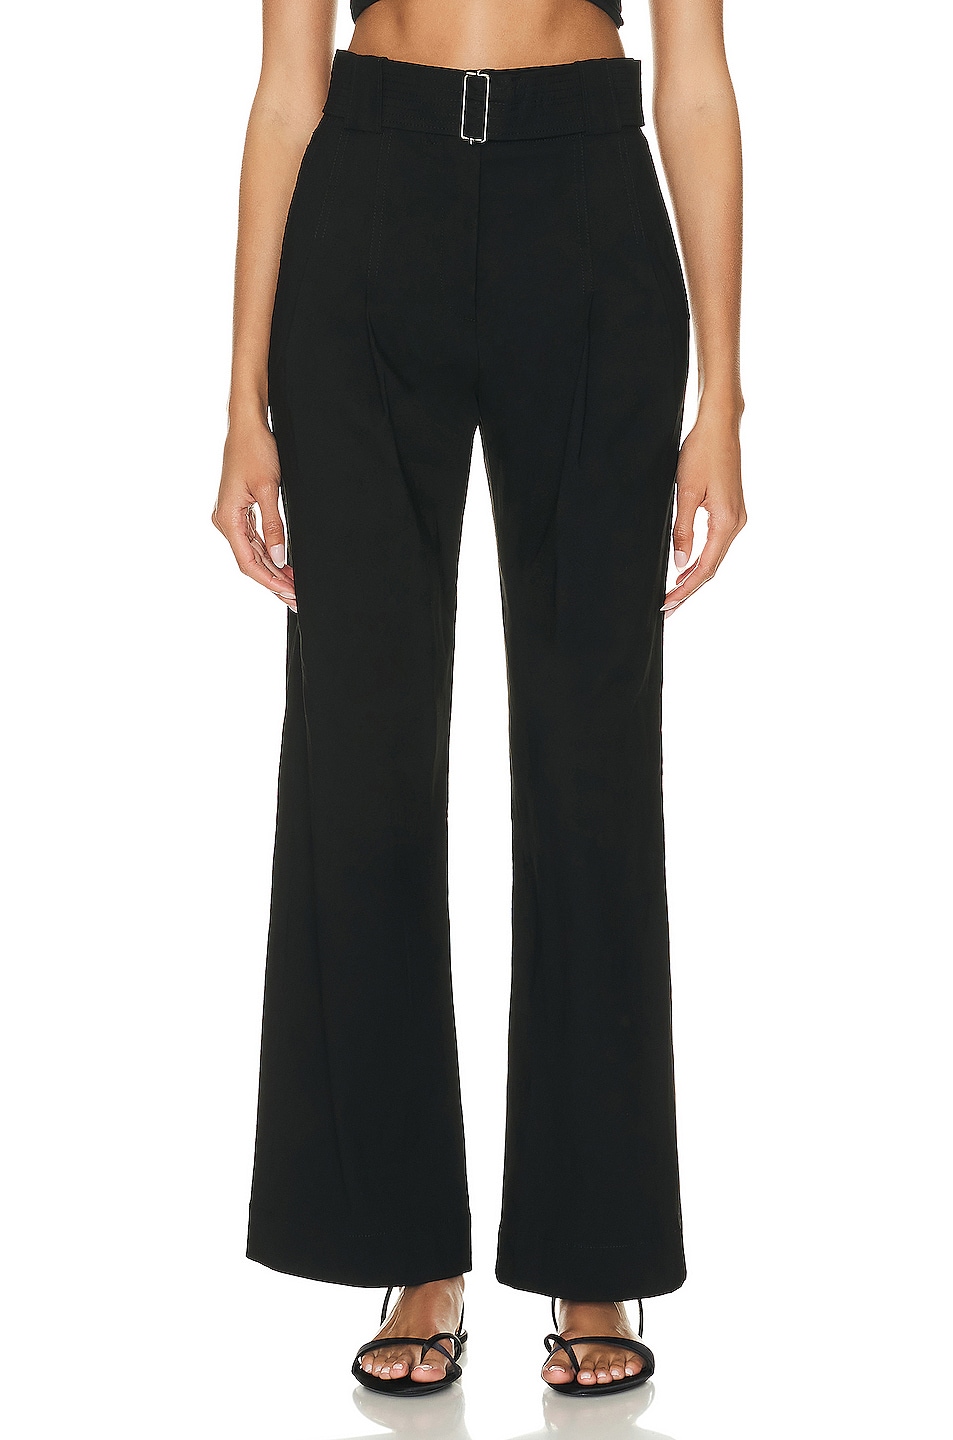 Image 1 of A.L.C. Darby Pant in Black